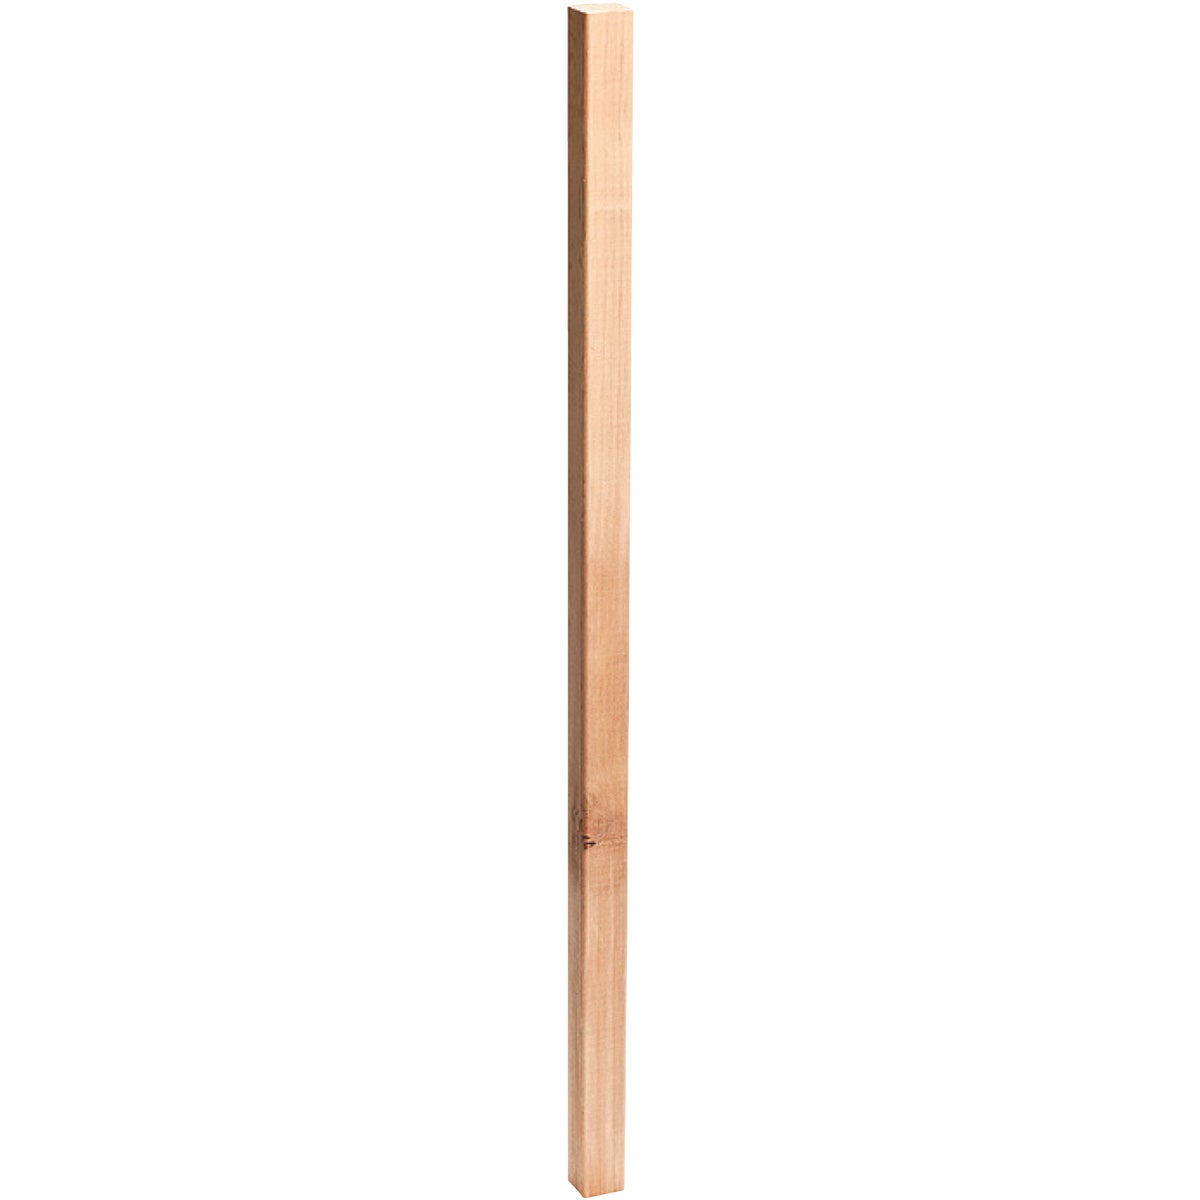 Item 160012, S4S cedar baluster. Tight knot baluster graded for appearance.